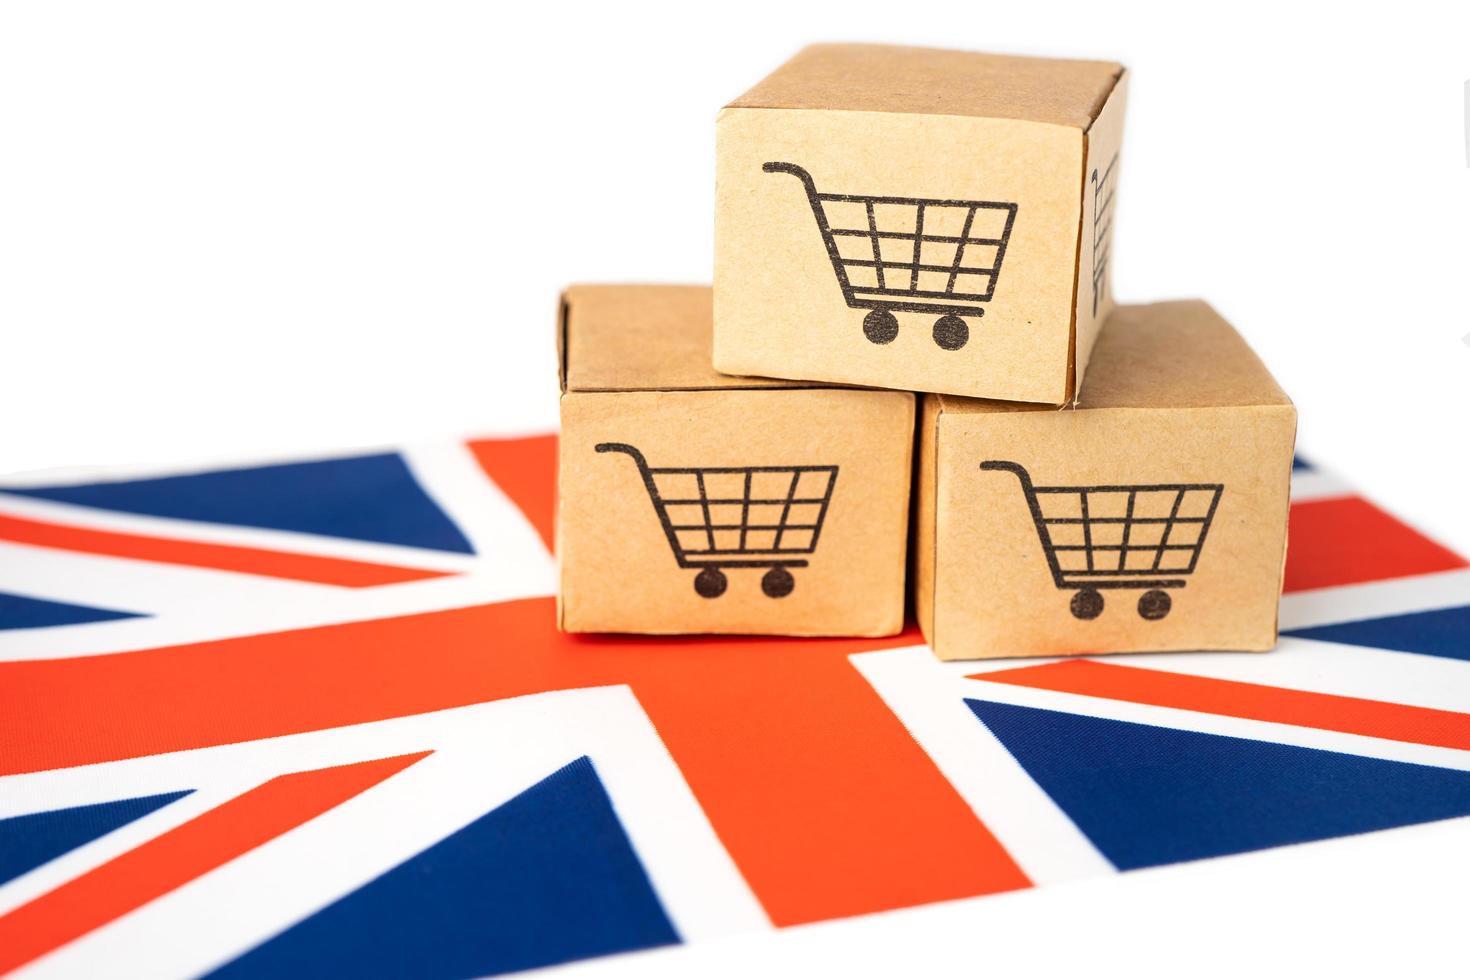 Box with shopping cart logo and United Kingdom flag, Import Export Shopping online or eCommerce finance delivery service store product shipping, trade, supplier concept. photo